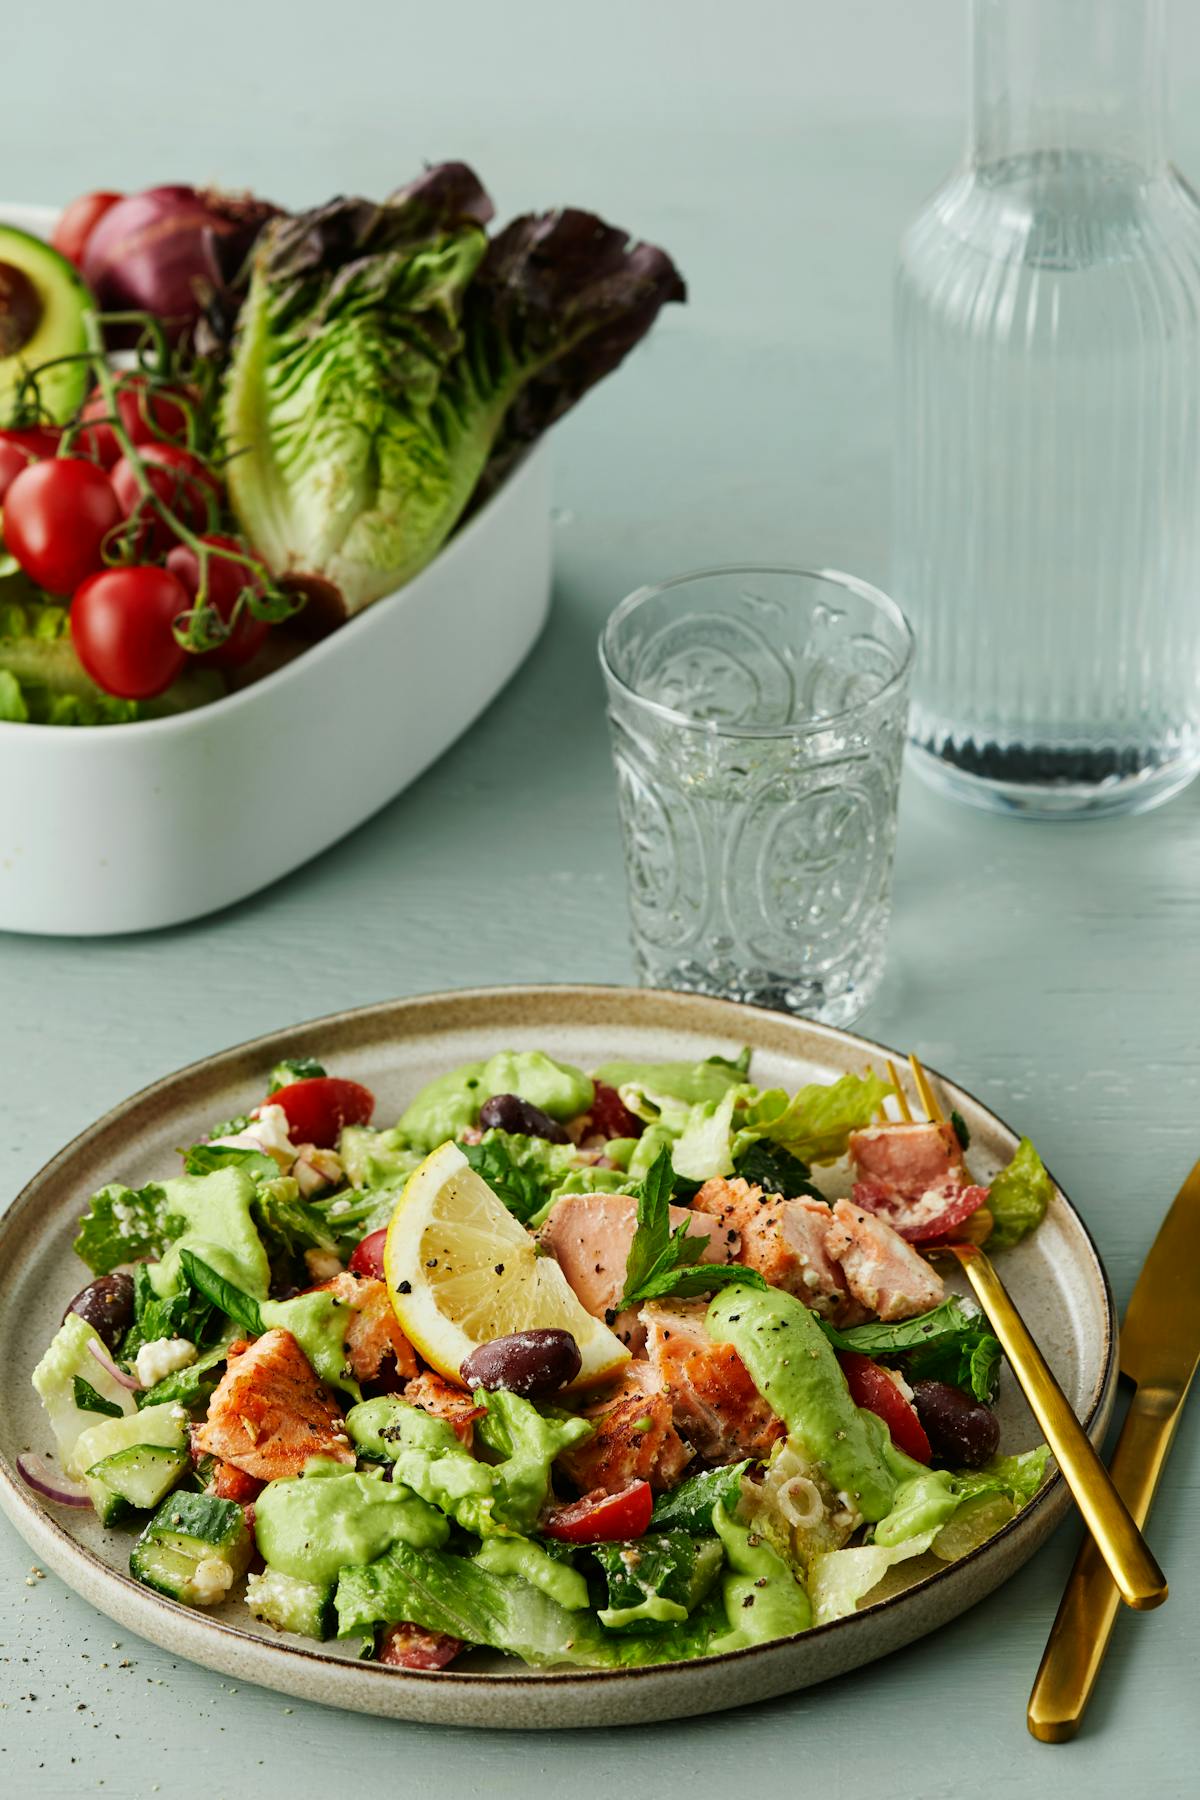 Salmon salad with feta cheese and avocado dressing